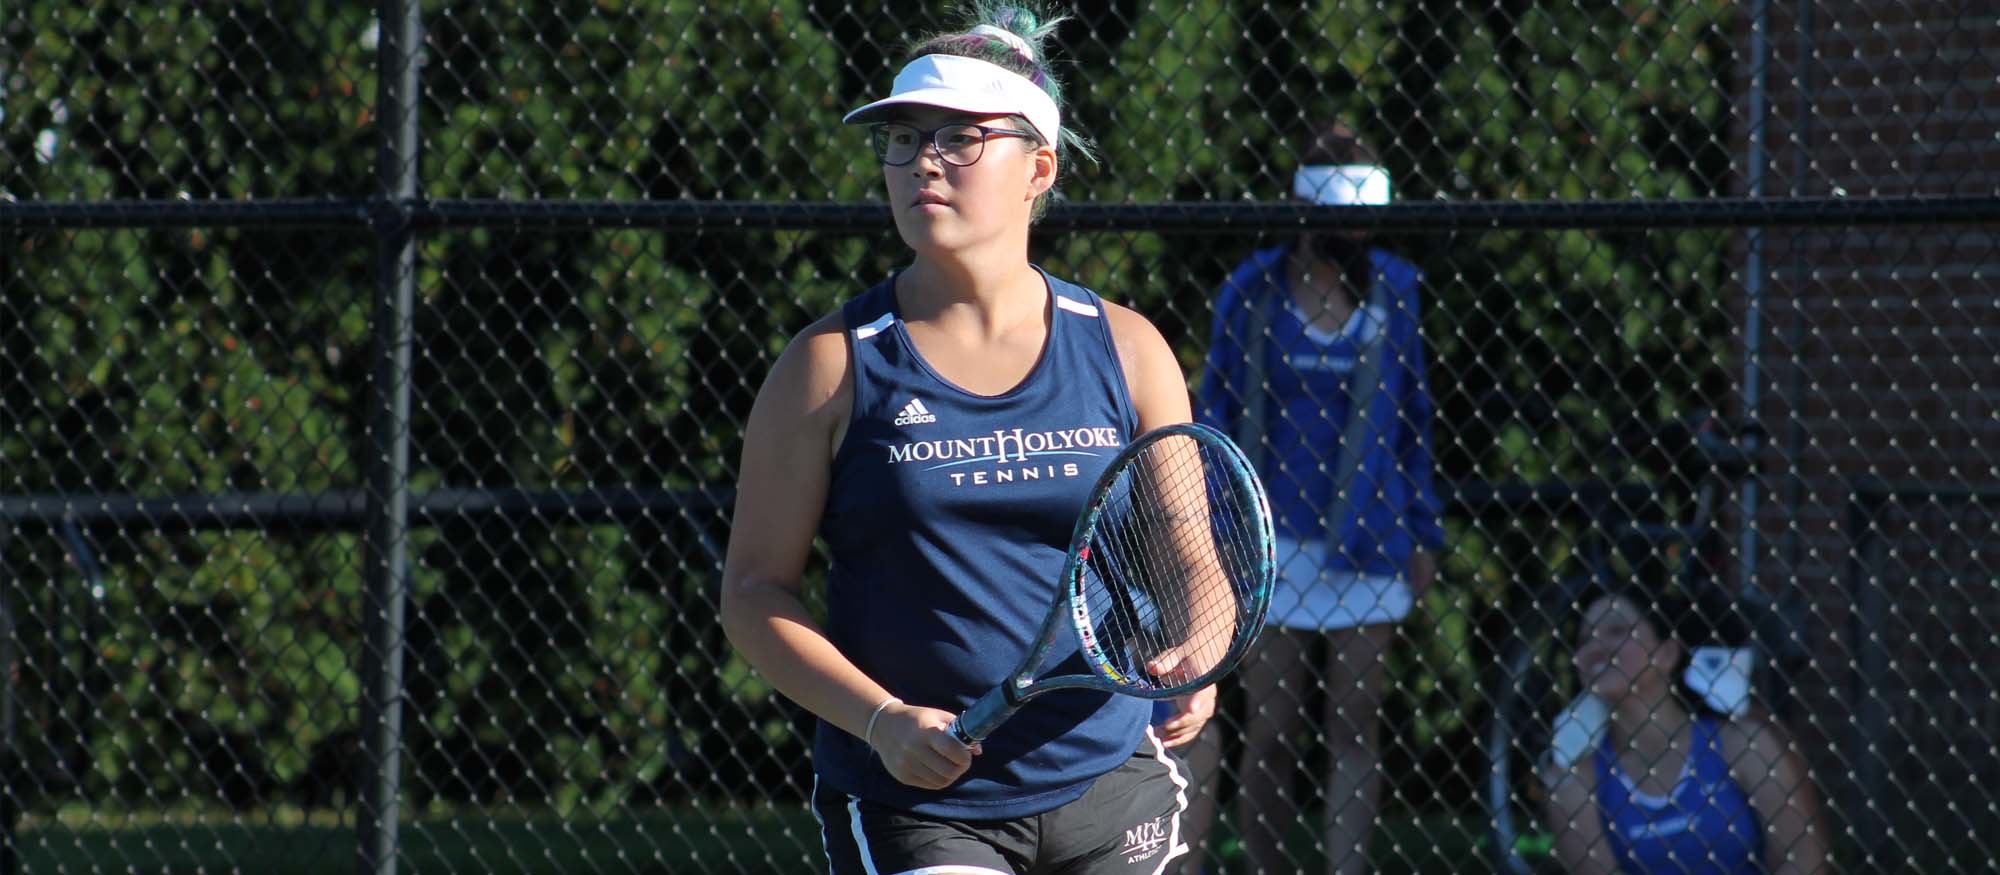 Tennis Falls to Colby-Sawyer College in Home Match